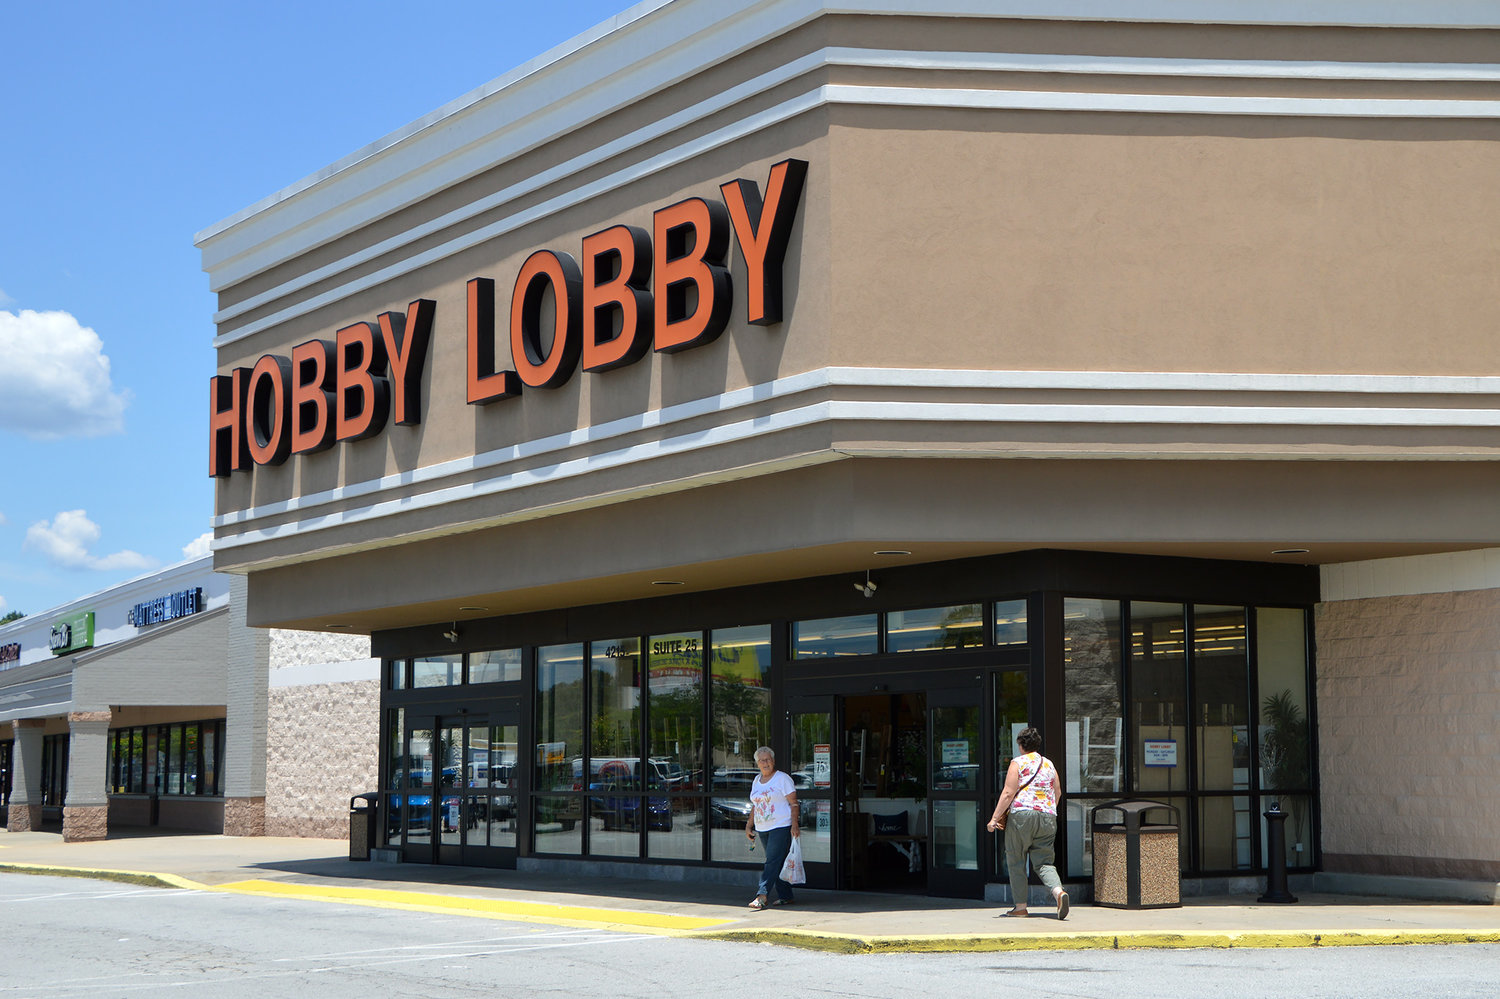 Shoppers come and go at a Hobby Lobby store in Hiram, Ga., July 15, 2022. (Christian Index/Henry Durand)